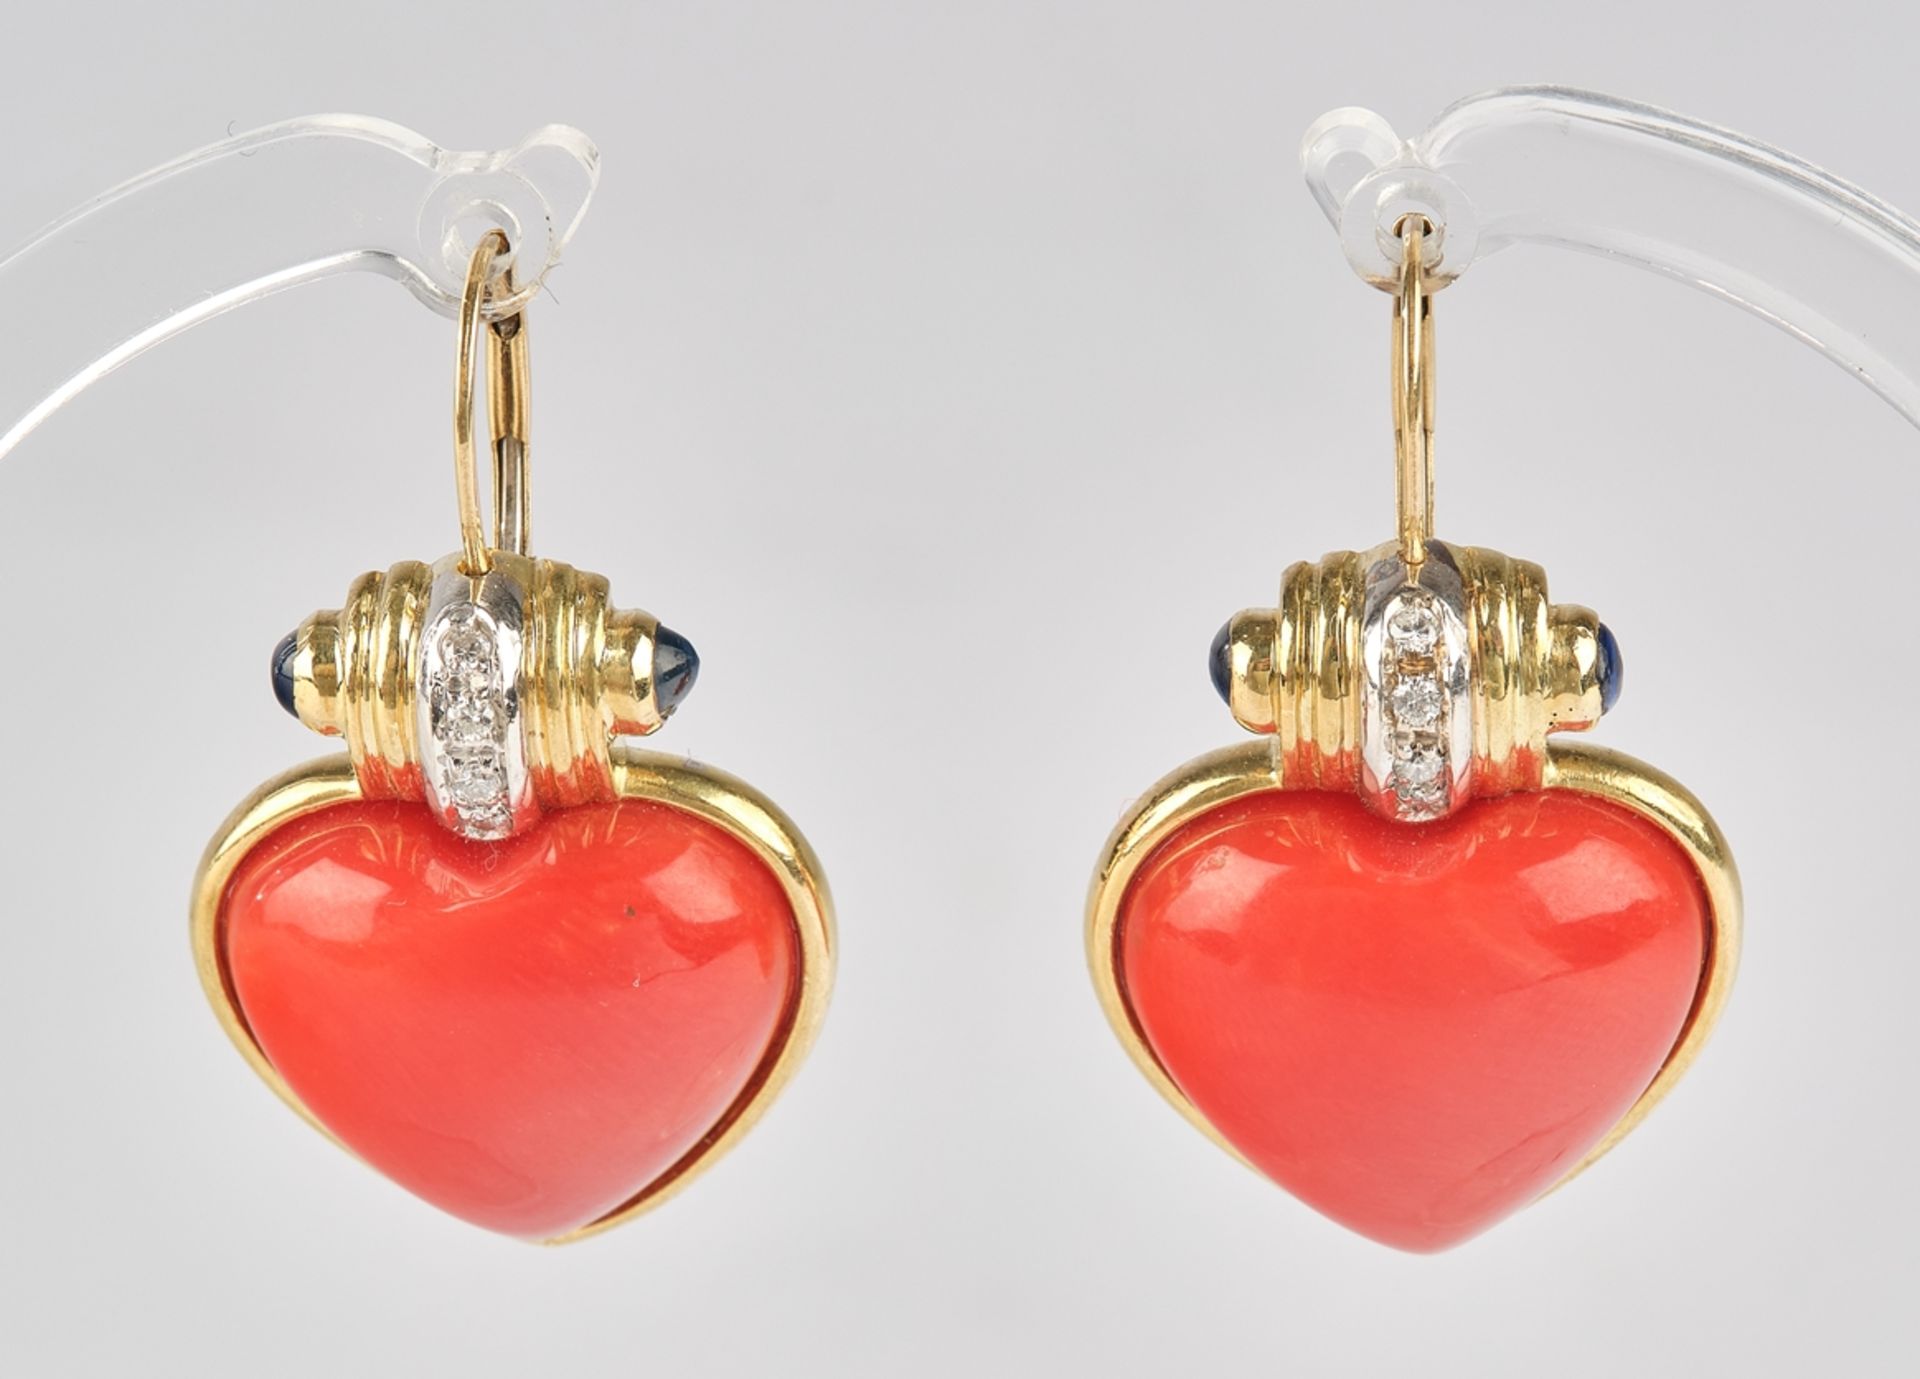 Pair of earrings, GG 750, 2 heart-shaped coral buttons, 4 small sapphire cabochons totalling ca. 0.